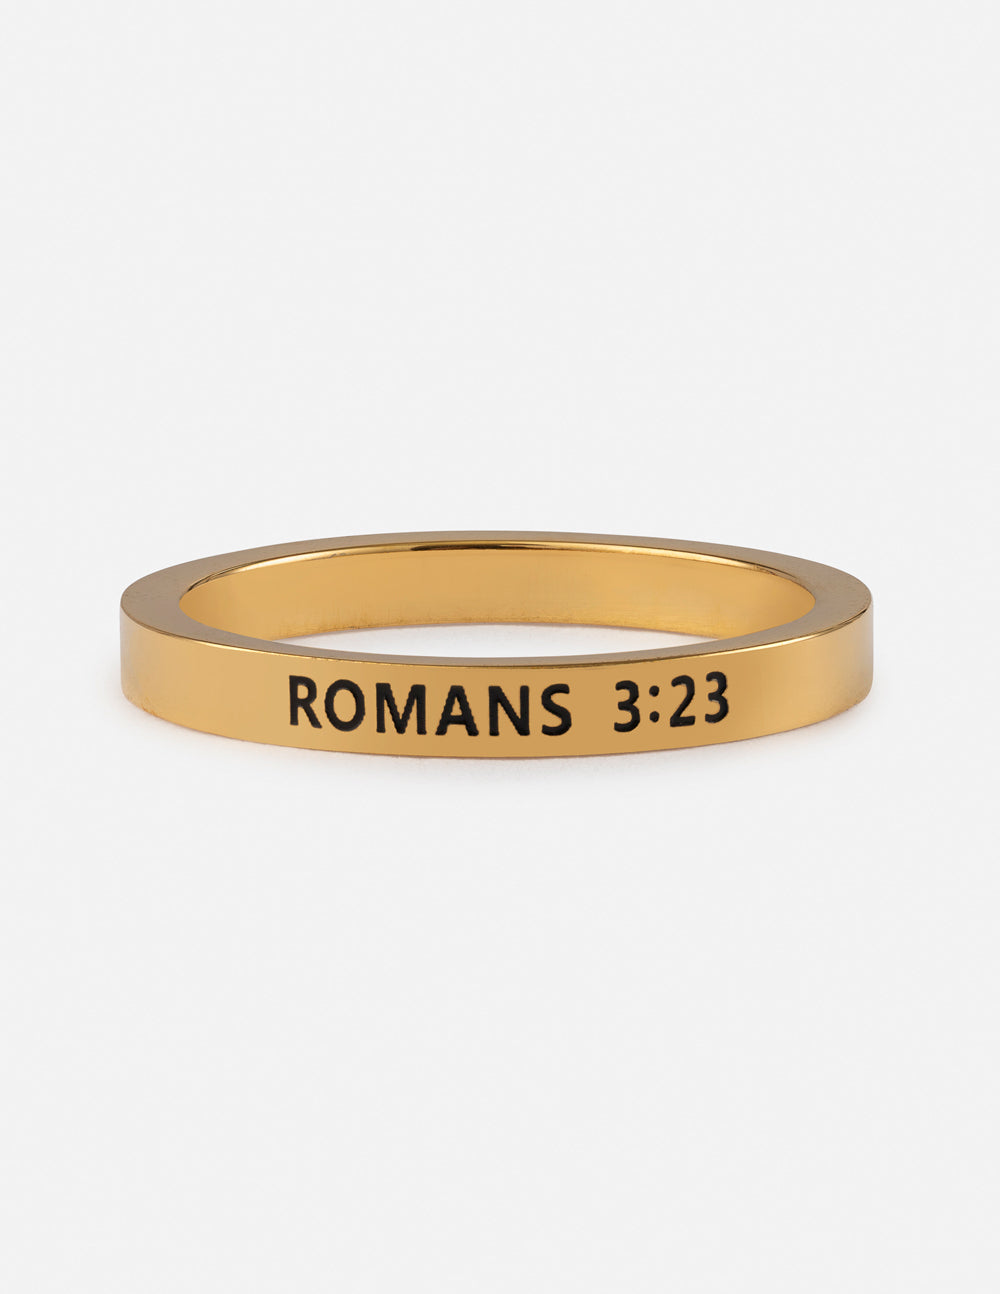 Romans 3:23 Ring | Christian Rings | Christian Gifts | Elevated Faith